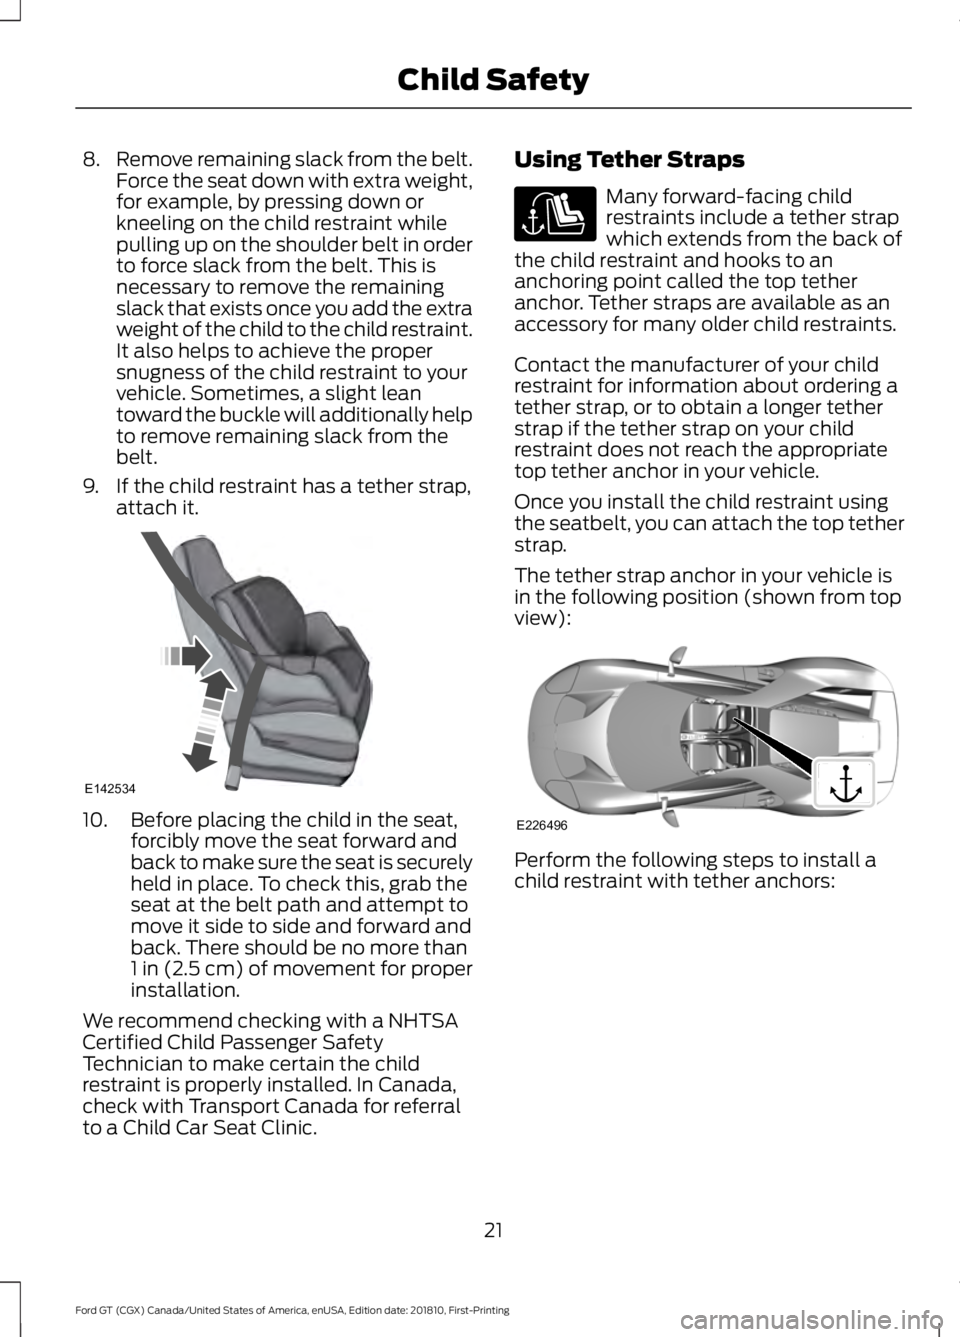 FORD GT 2019  Owners Manual 8.
Remove remaining slack from the belt.
Force the seat down with extra weight,
for example, by pressing down or
kneeling on the child restraint while
pulling up on the shoulder belt in order
to force